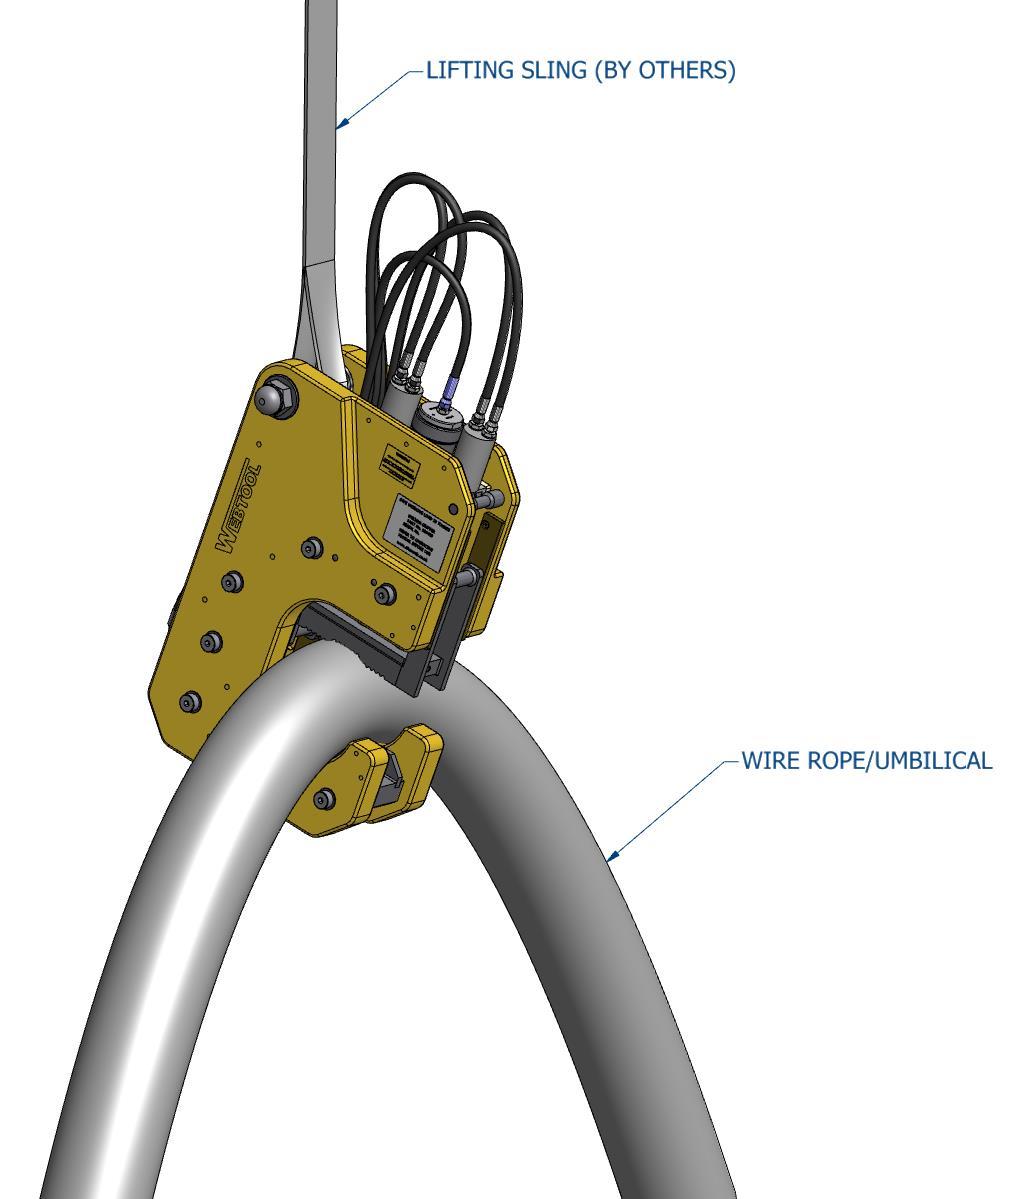 The optimum lifting method is as shown below in figure 2a, with the lift point located centrally along the length of the wire rope/umbilical.